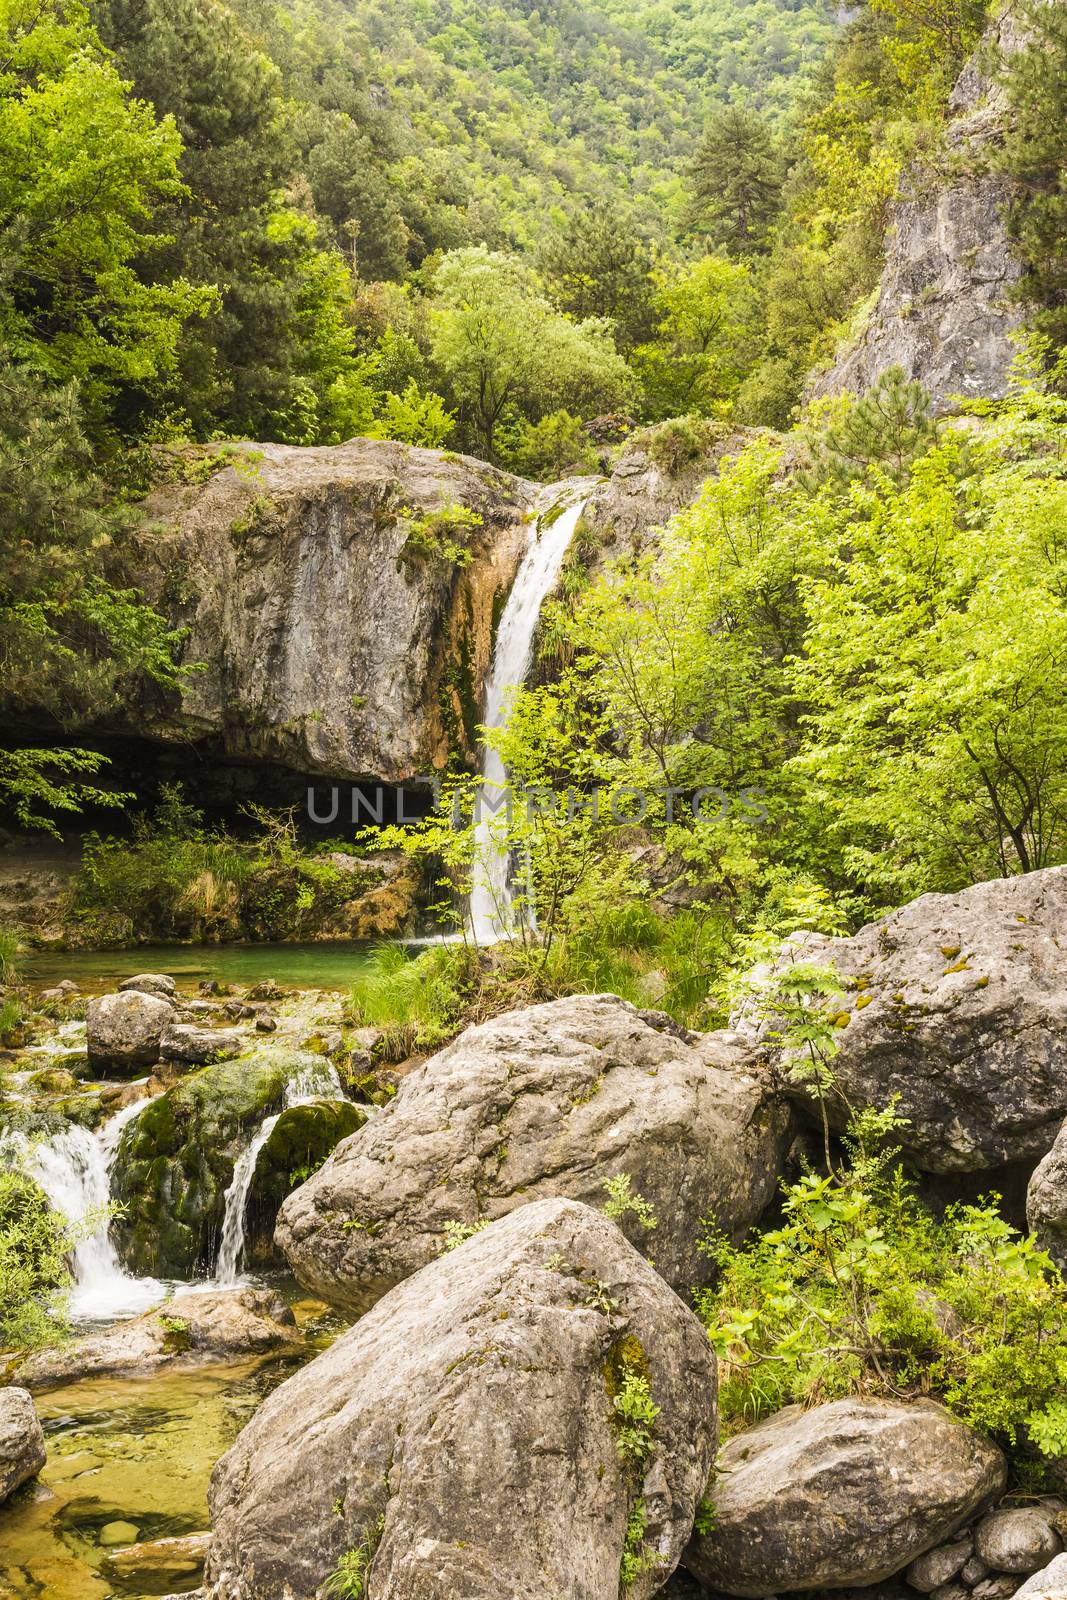 Ourlia waterfalls at Olympus mountain, Greece by ankarb